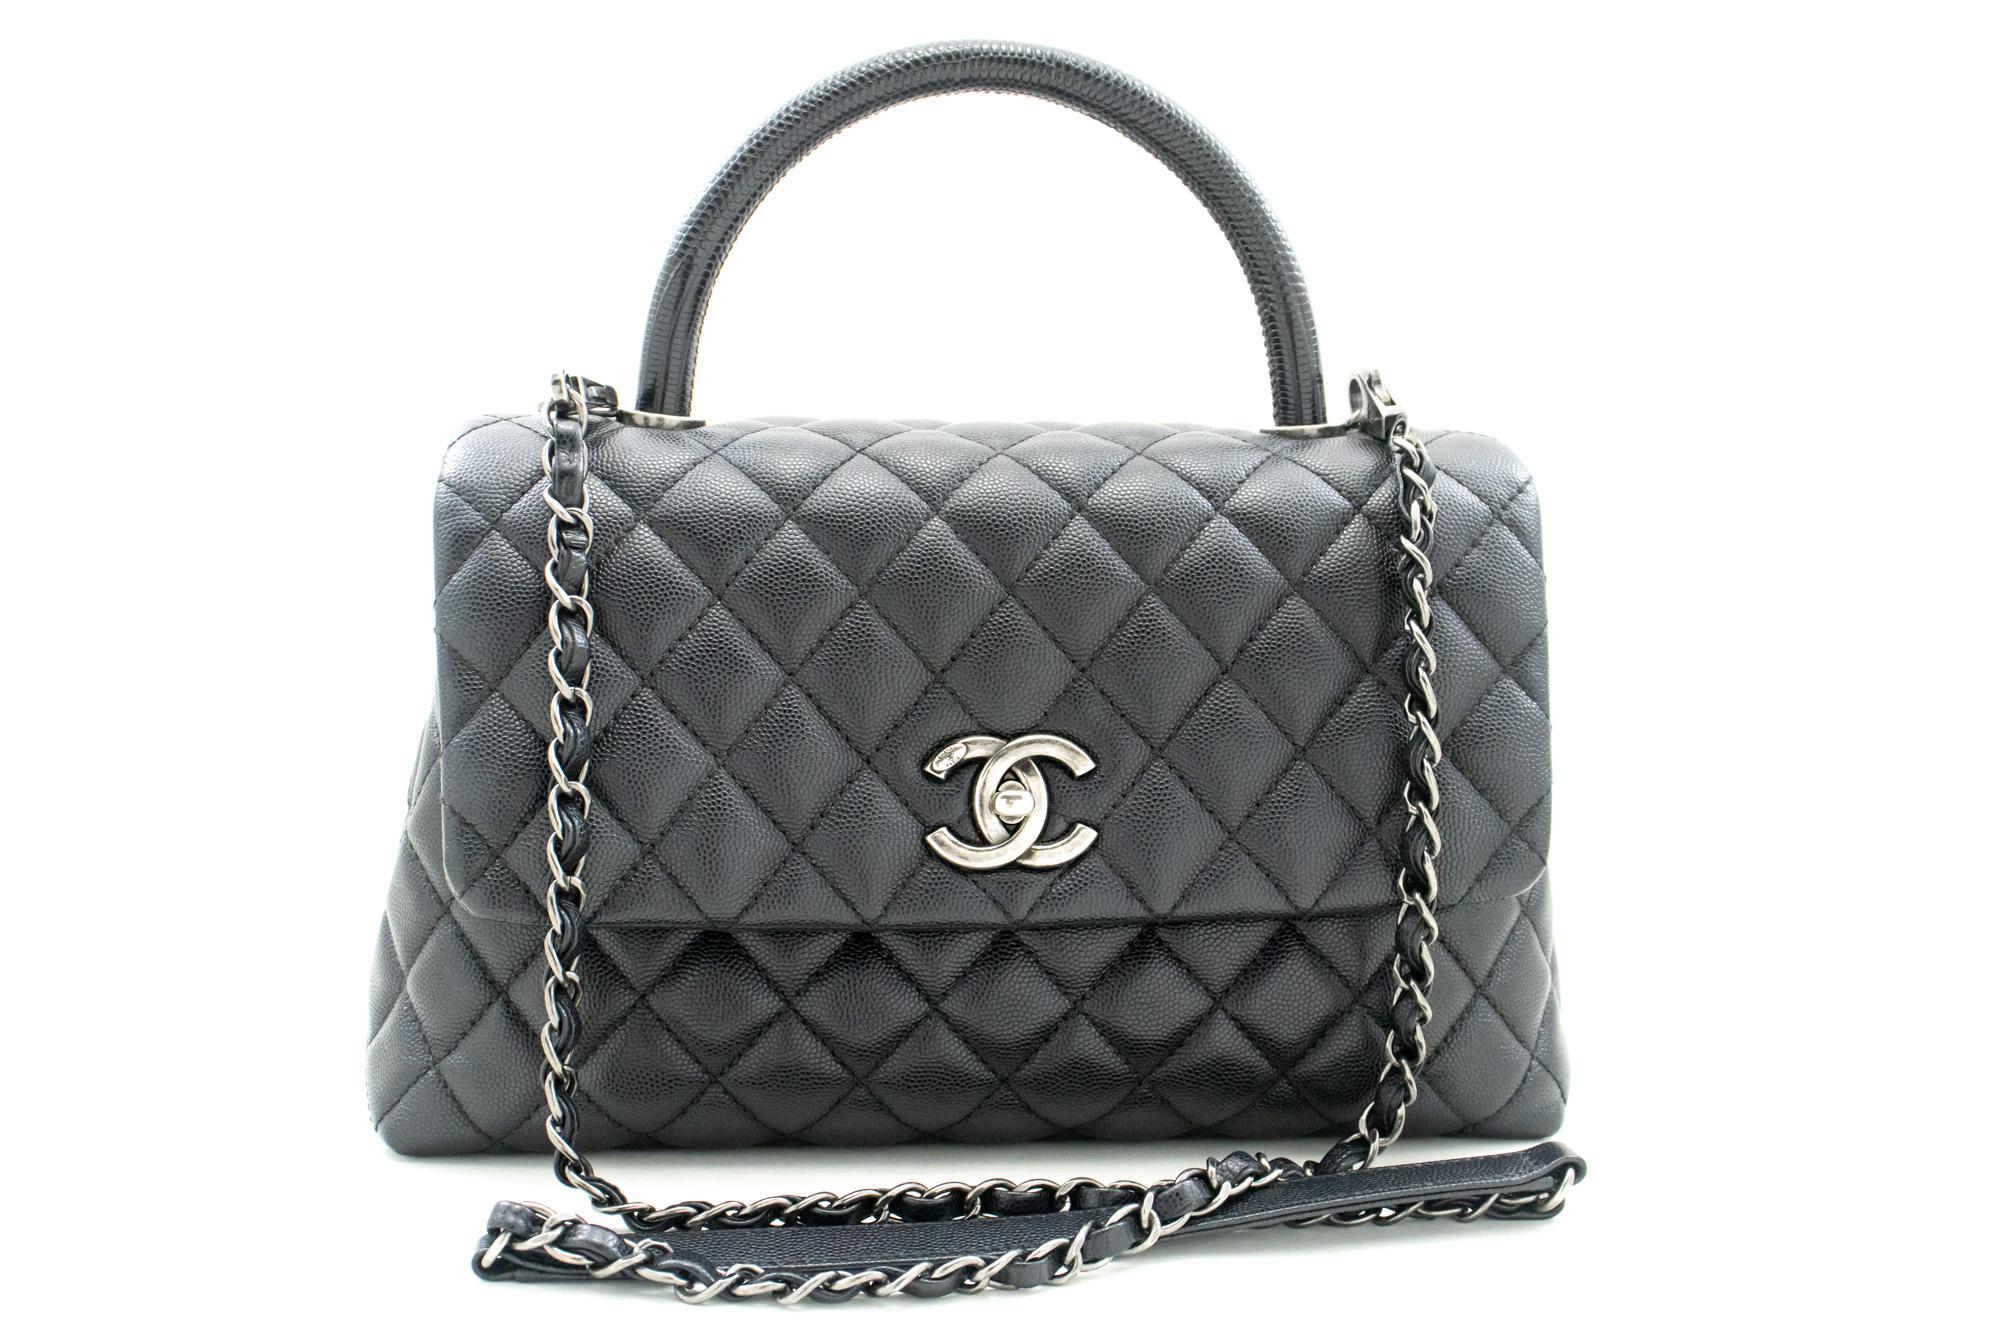 An authentic CHANEL 2 Way Top Handle Handbag Shoulder Bag Black Caviar Leather. The color is Black. The outside material is Leather. The pattern is Solid. This item is Contemporary. The year of manufacture would be 2016.
Conditions & Ratings
Outside